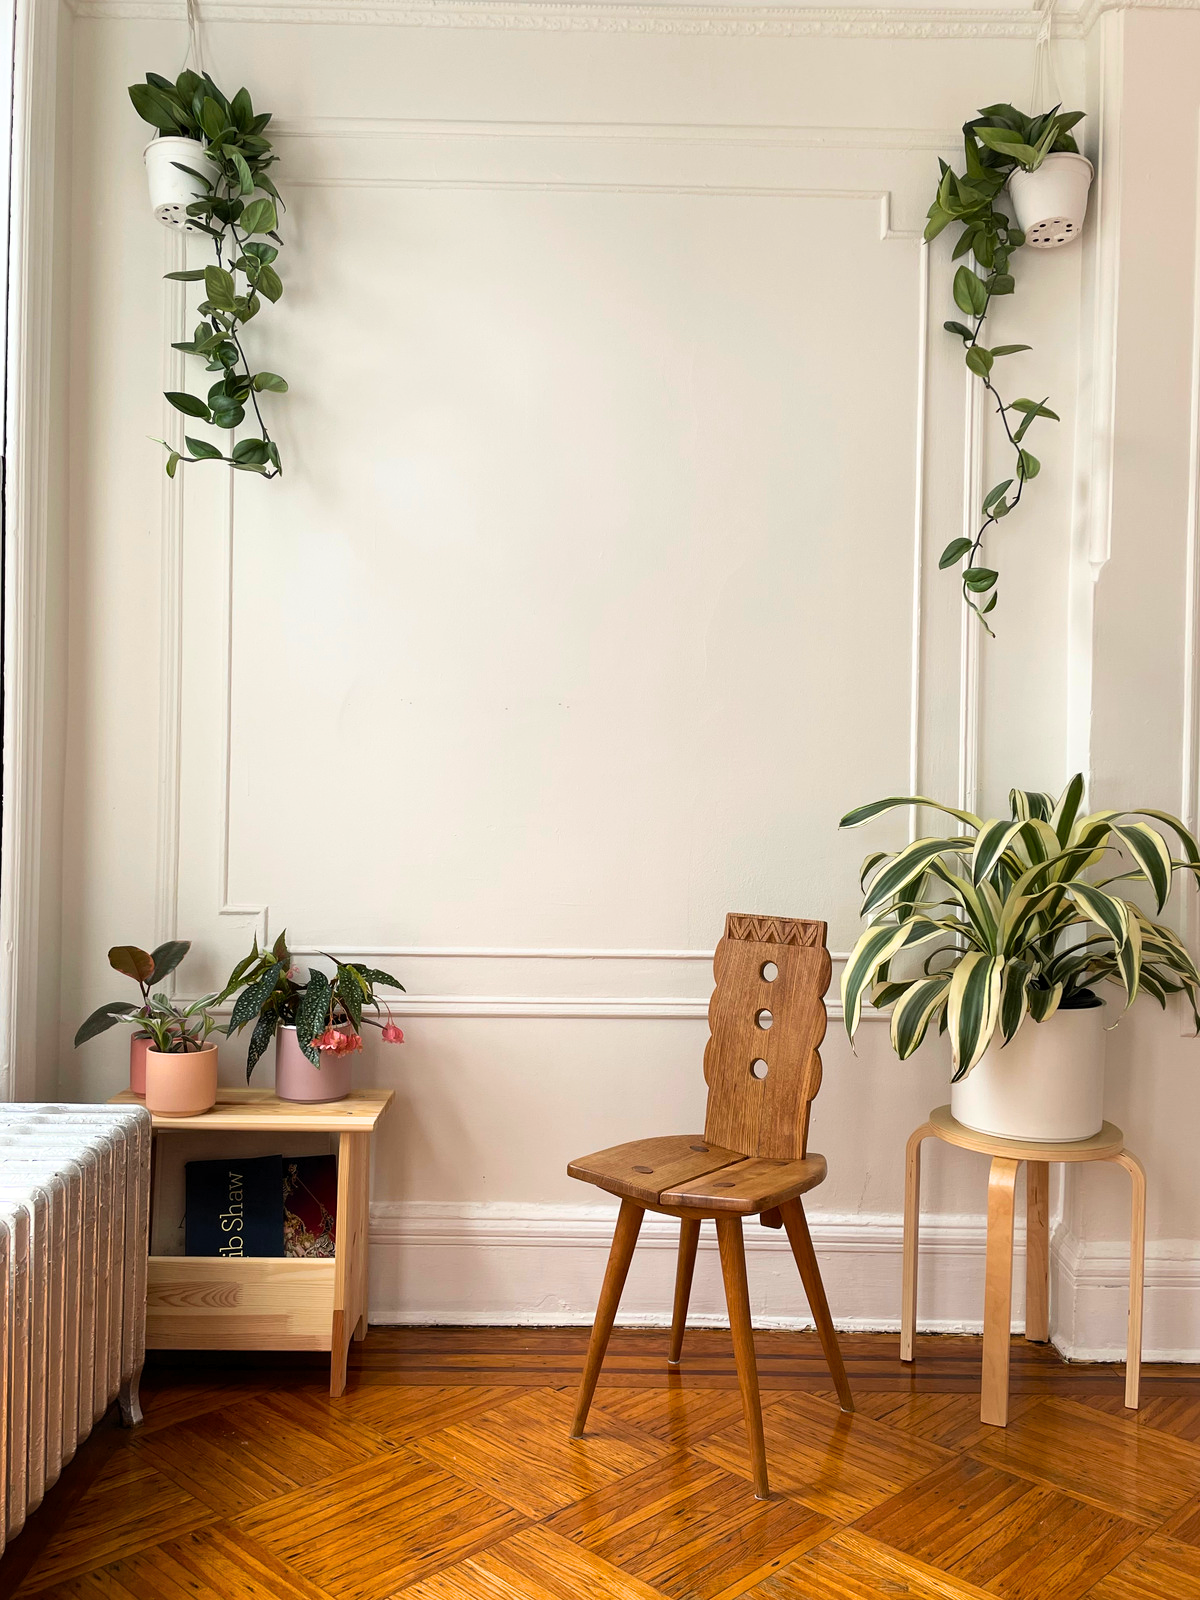 Reading nook, styled by Hortihop, including two trailing plants that frame molding on the wall, a dracaena atop a simple wooden stool, a wooden chair, and a simple wooden book holder with three potted plants at top in pastel-colored pots